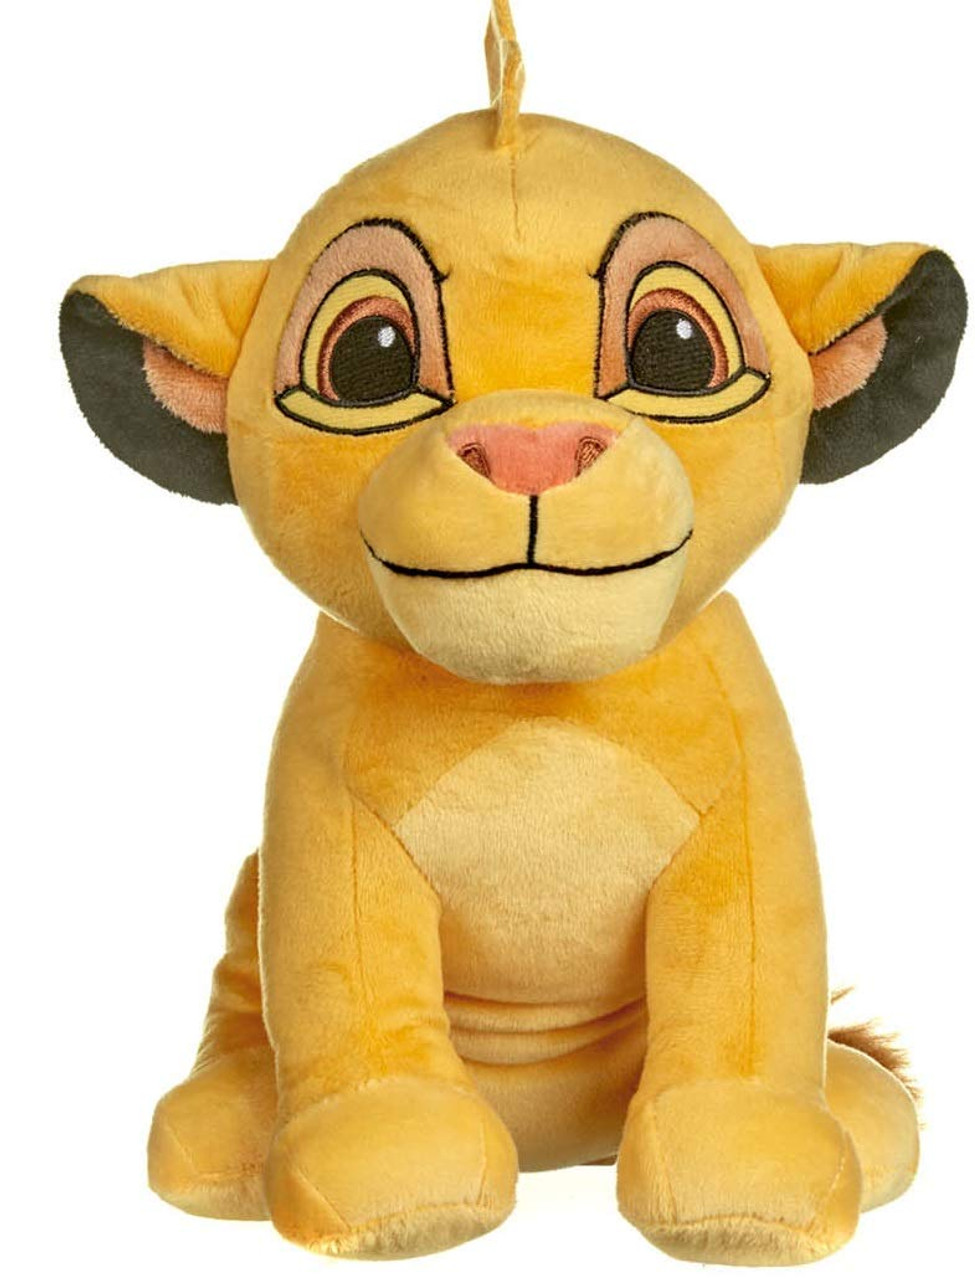 lion king soft toy